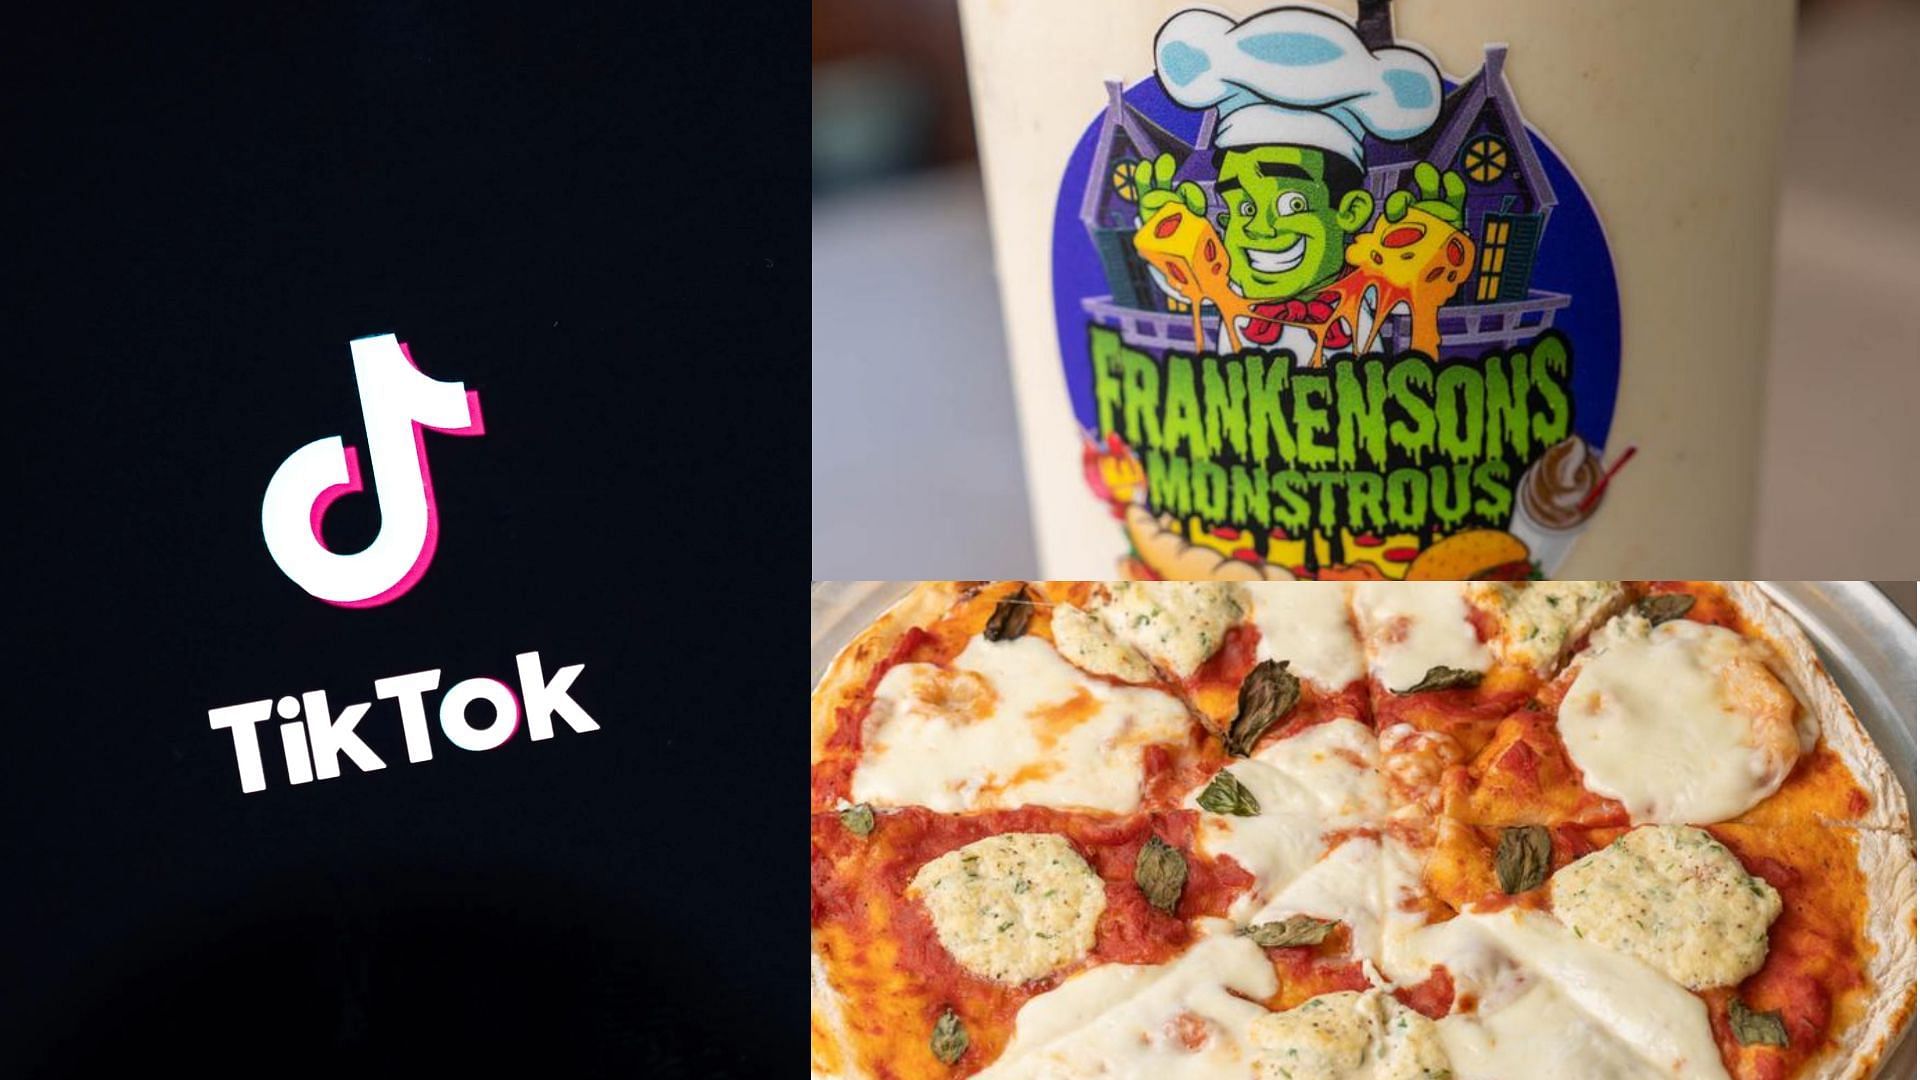 Frankensons Pizzeria experiences a miracle-like growth following the review by a famous TikTok food reviewer, Keith Lee (Image via Frankensons Pizzeria/Drew Angerer/Getty Images)